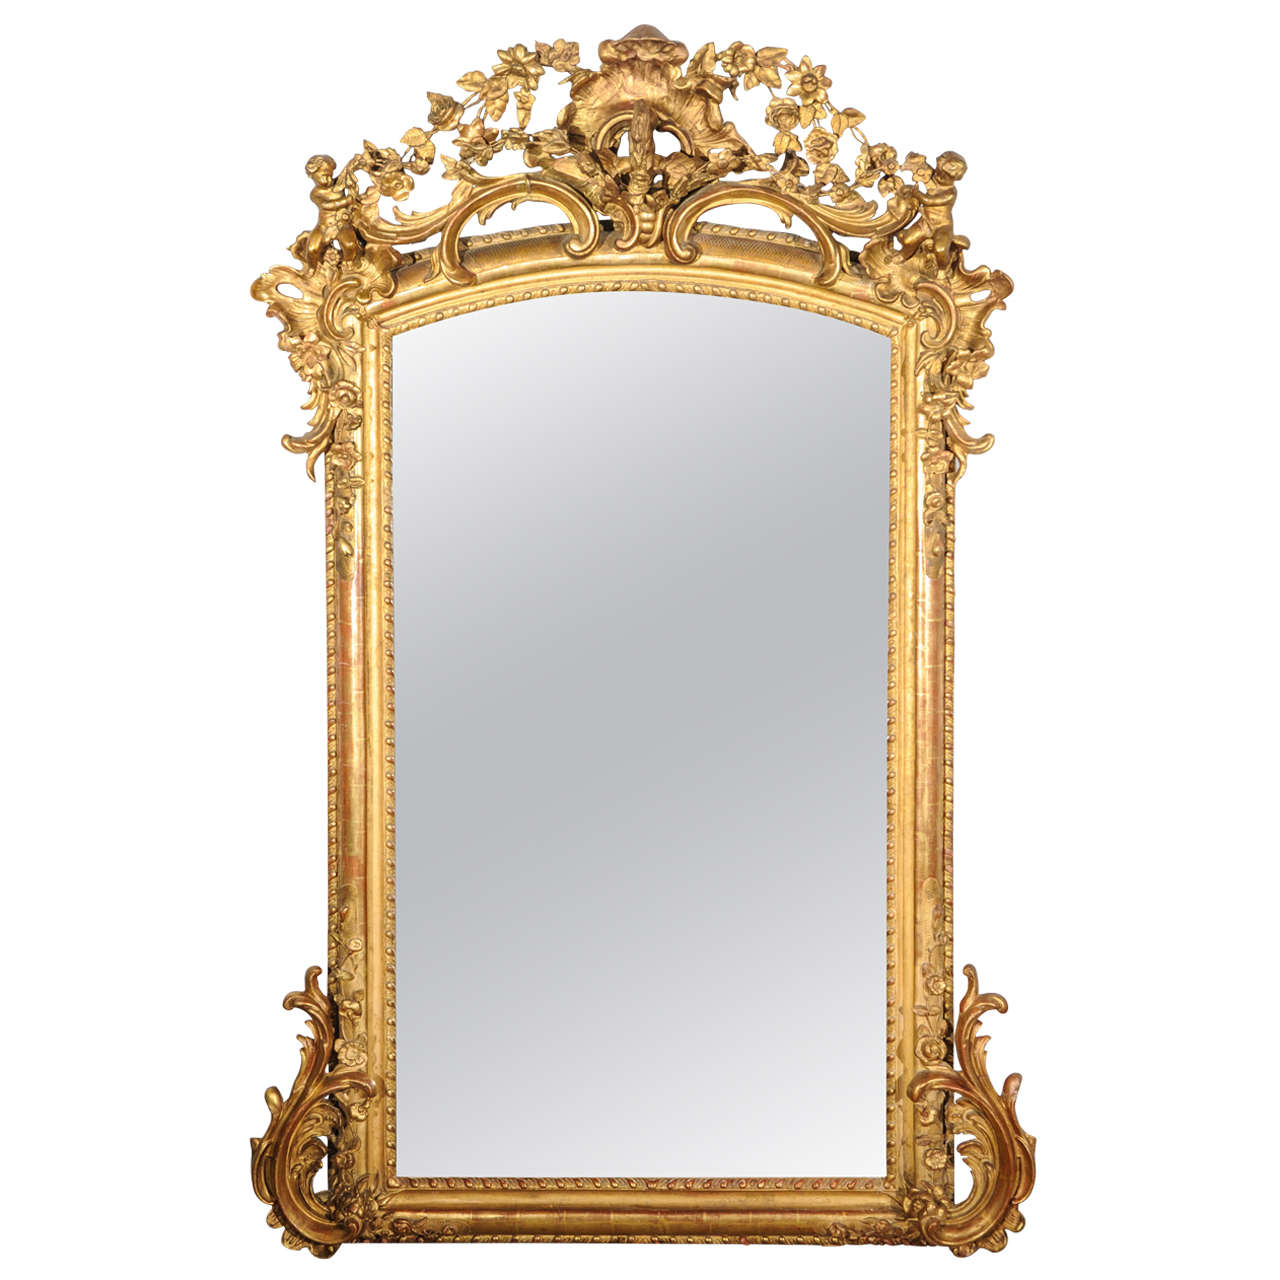 Large and Richly Decorated 19th Century French Rococo Giltwood and Gesso Mirror For Sale at 1stdibs